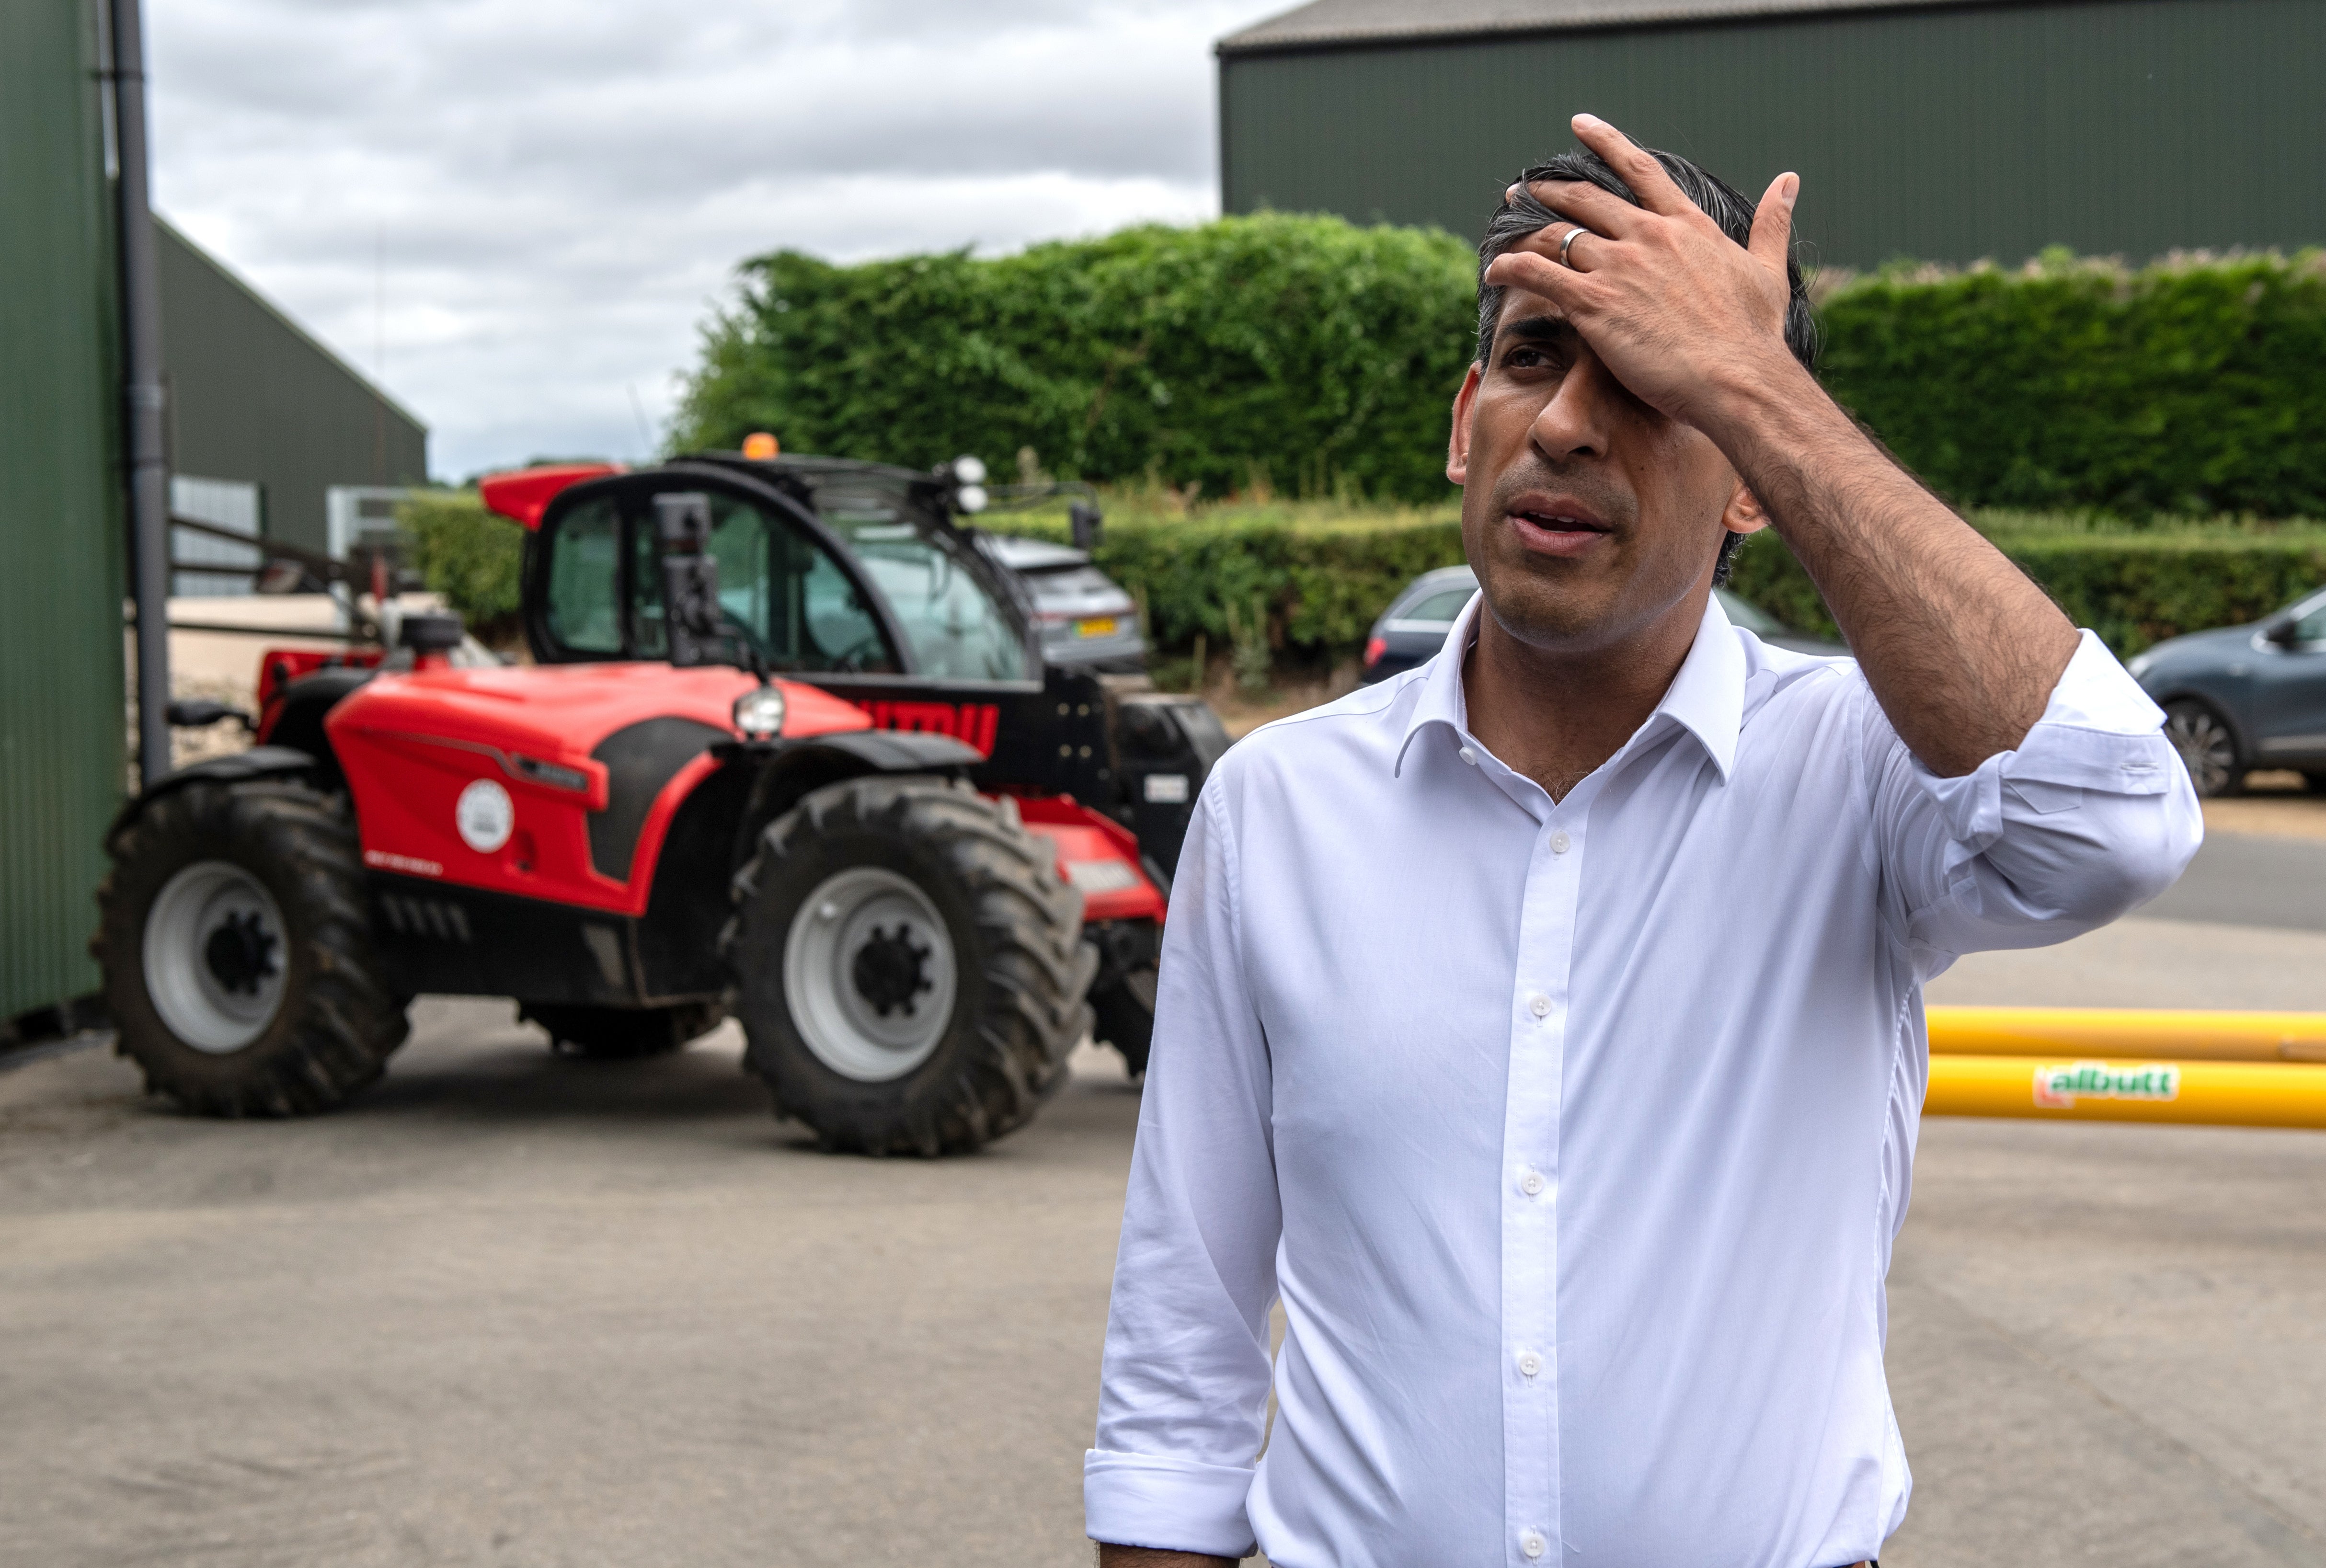 Rishi Sunak has acknowledged he is ‘playing catch-up’ as his rival maintains a clear lead in the leadership race while appearing to claim for himself the sought-after underdog status (Chris J Ratcliffe/PA)